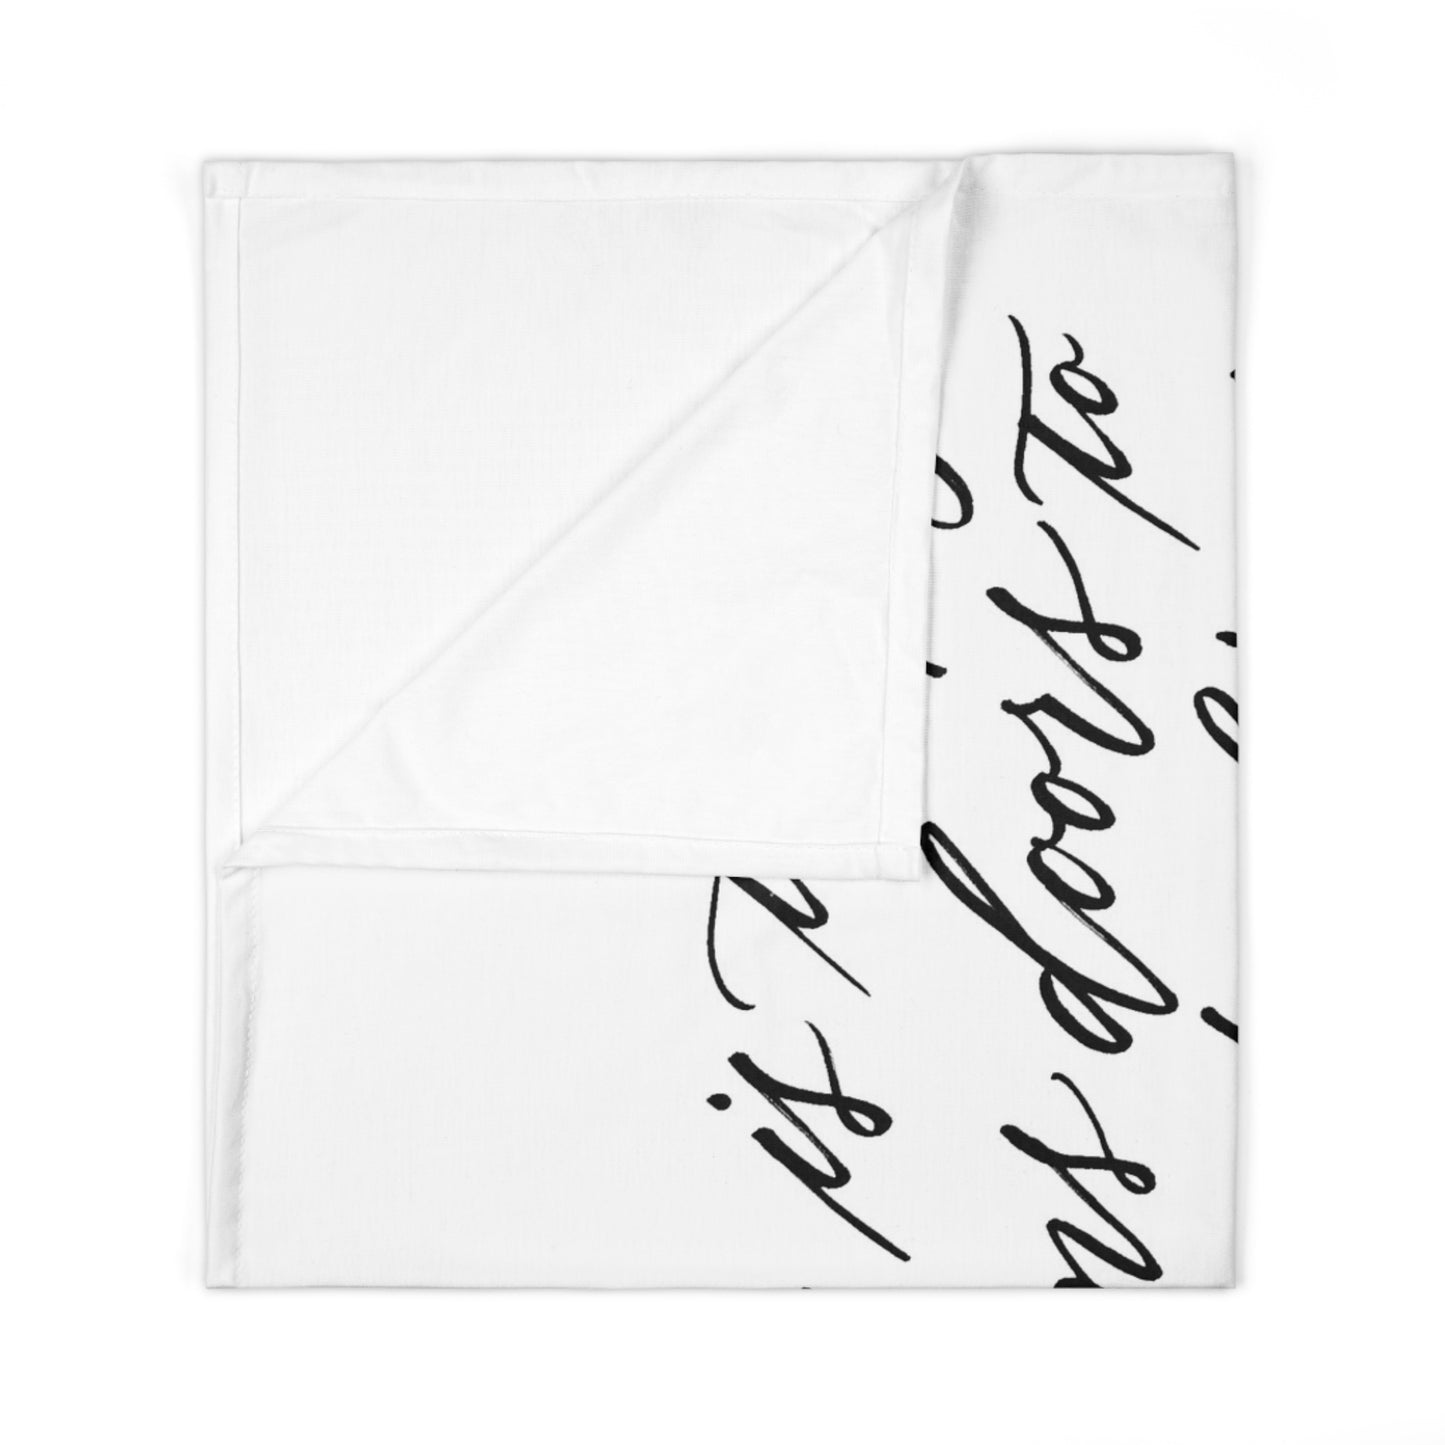 "Reading is Key" Ruth Bader Ginsburg RBG Quote Calligraphy Printed Super Soft Baby Swaddle Blanket